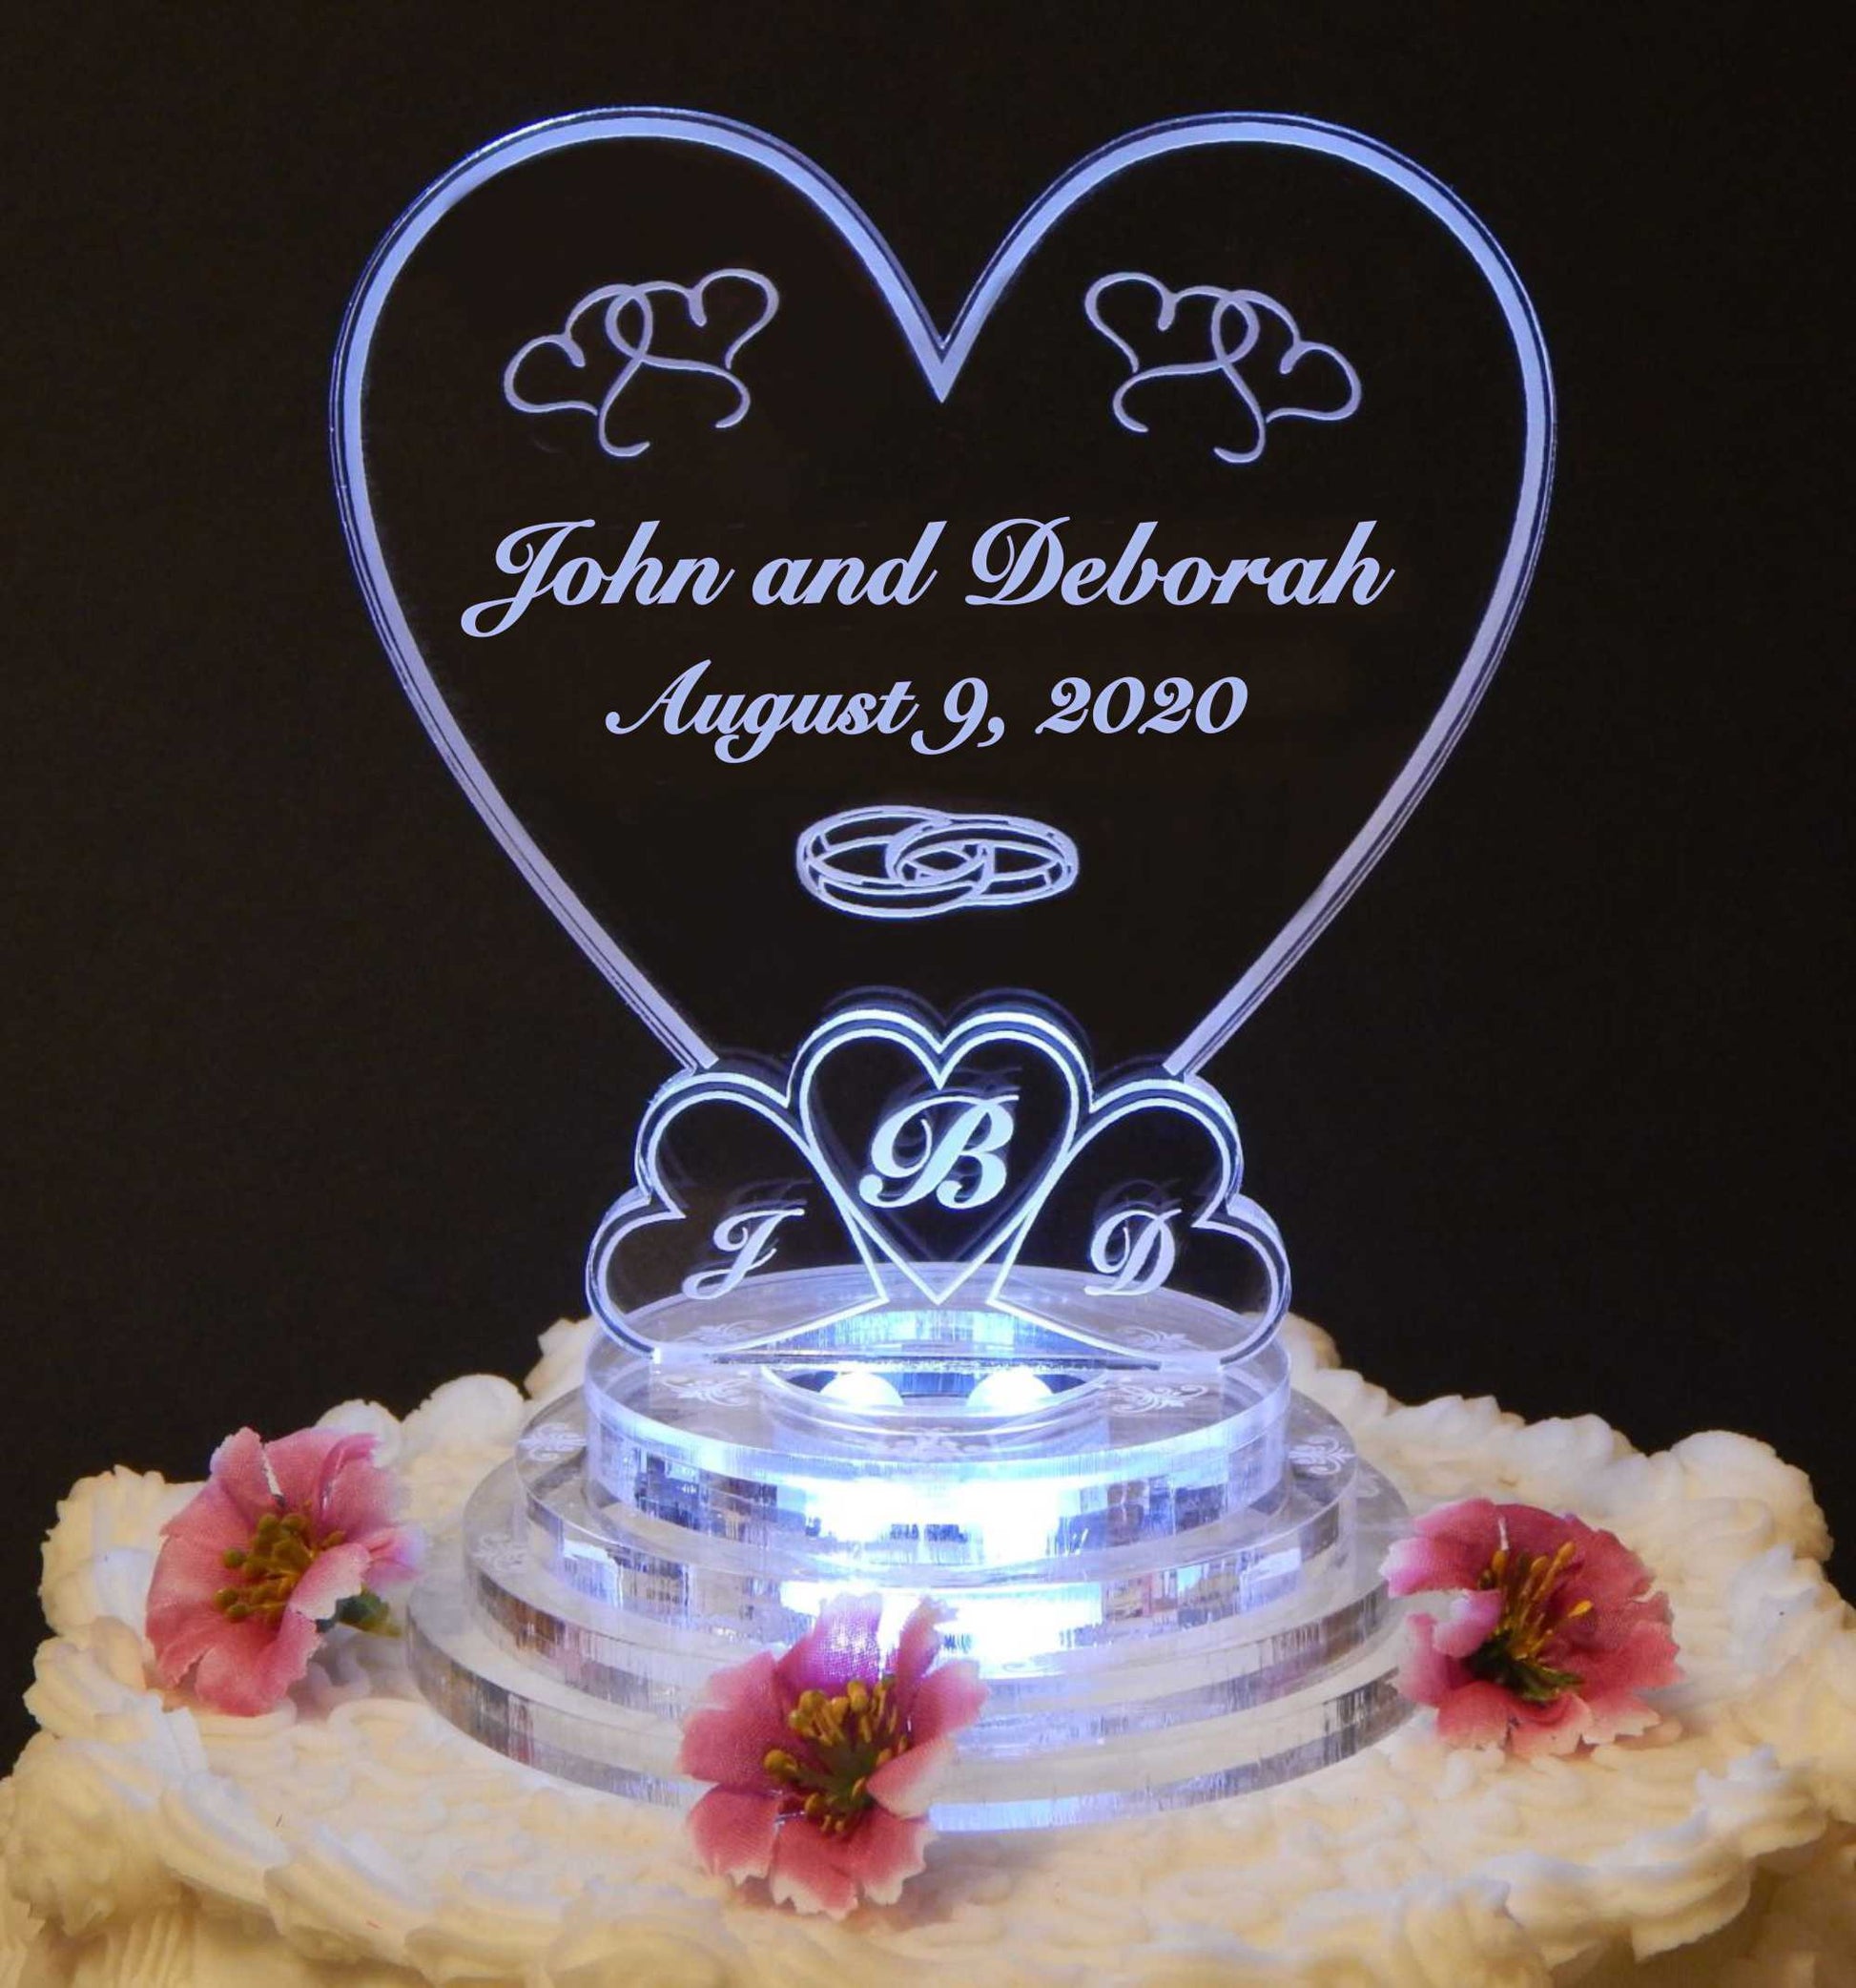 clear acrylic heart shaped cake topper engraved with names, date and 3 monogram letters at bottom inside 3 hearts